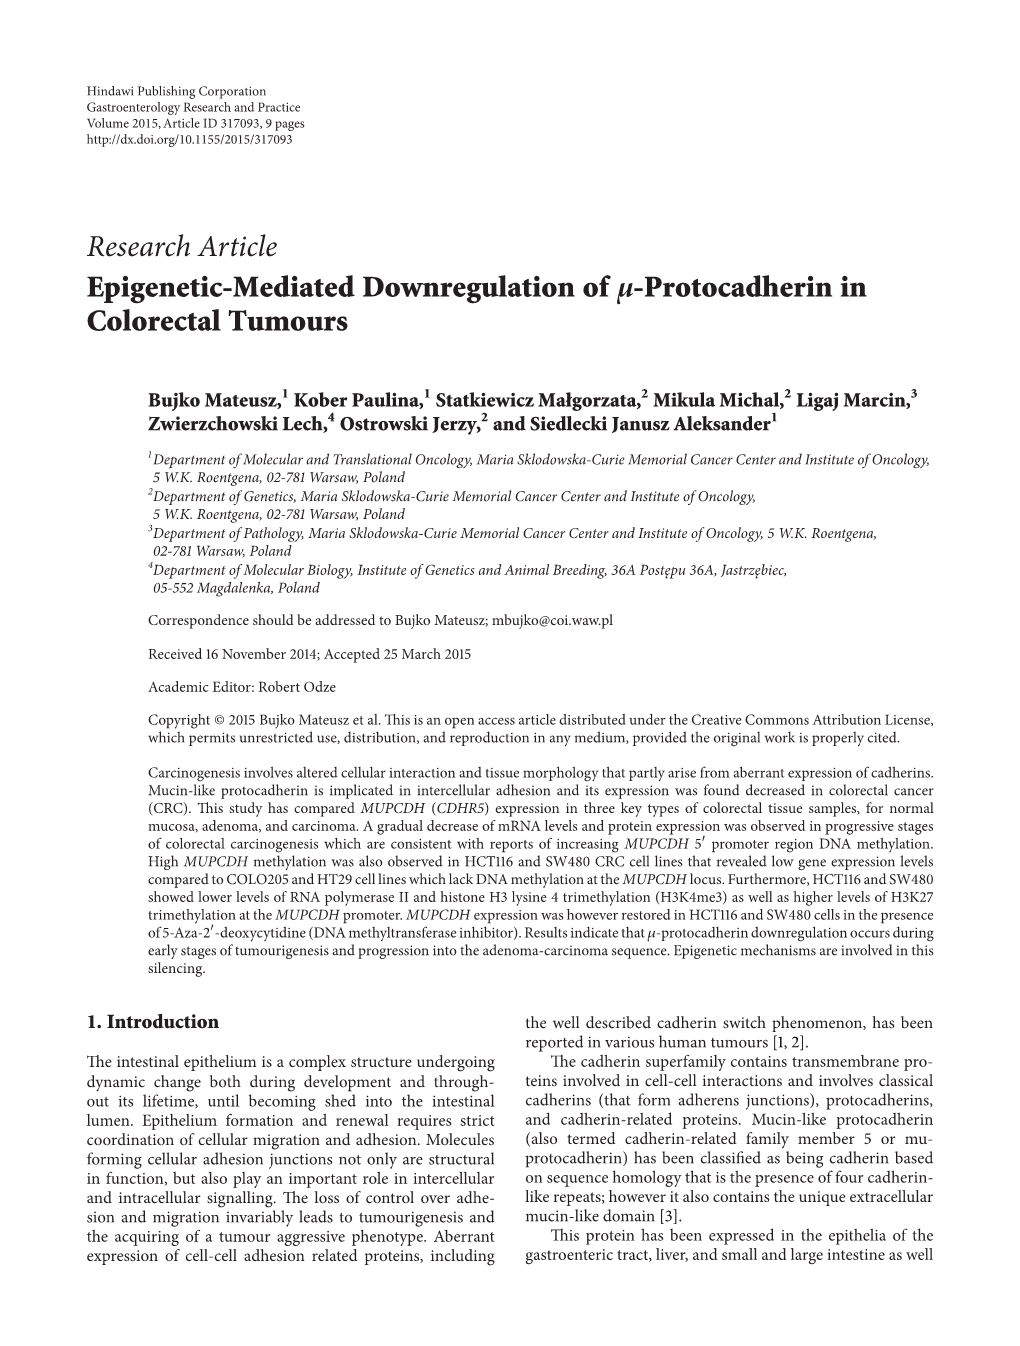 Protocadherin in Colorectal Tumours